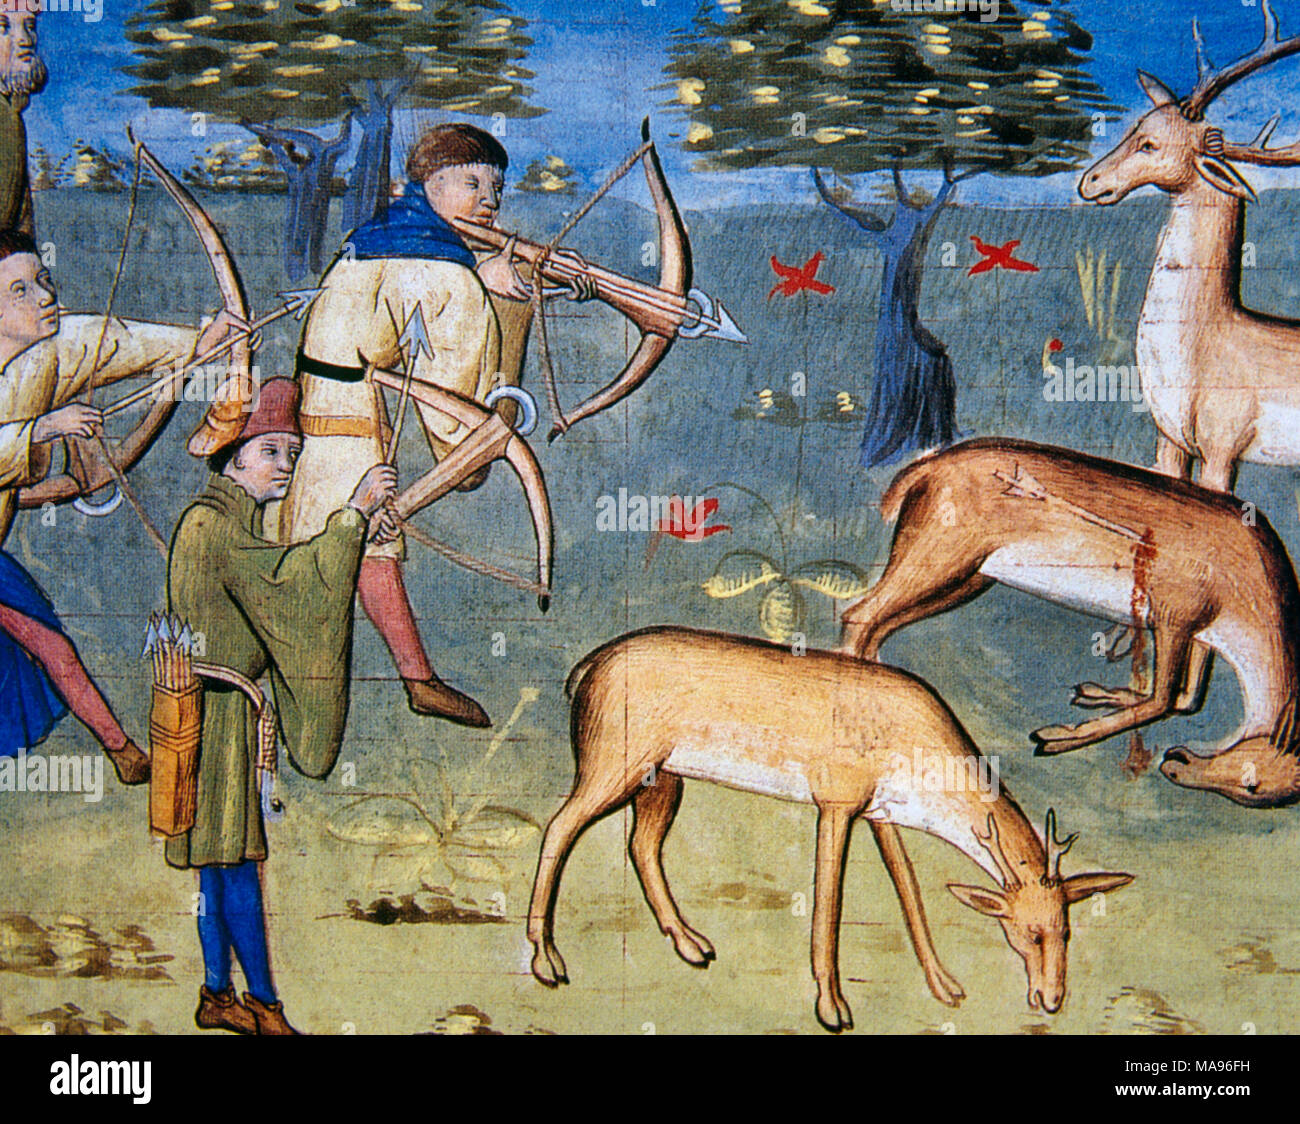 Le Livre de Chasse (Book of the Hunt) by Gaston Phobus (1331-1391). Written around 1387-1389. Book dedicated to Philip the Bond, Duke of Burgundy. Illuminated manuscript, 15th century. Hunting scene with bow and crossbows. Conde Museum. Chateau of Chantilly. France. Stock Photo